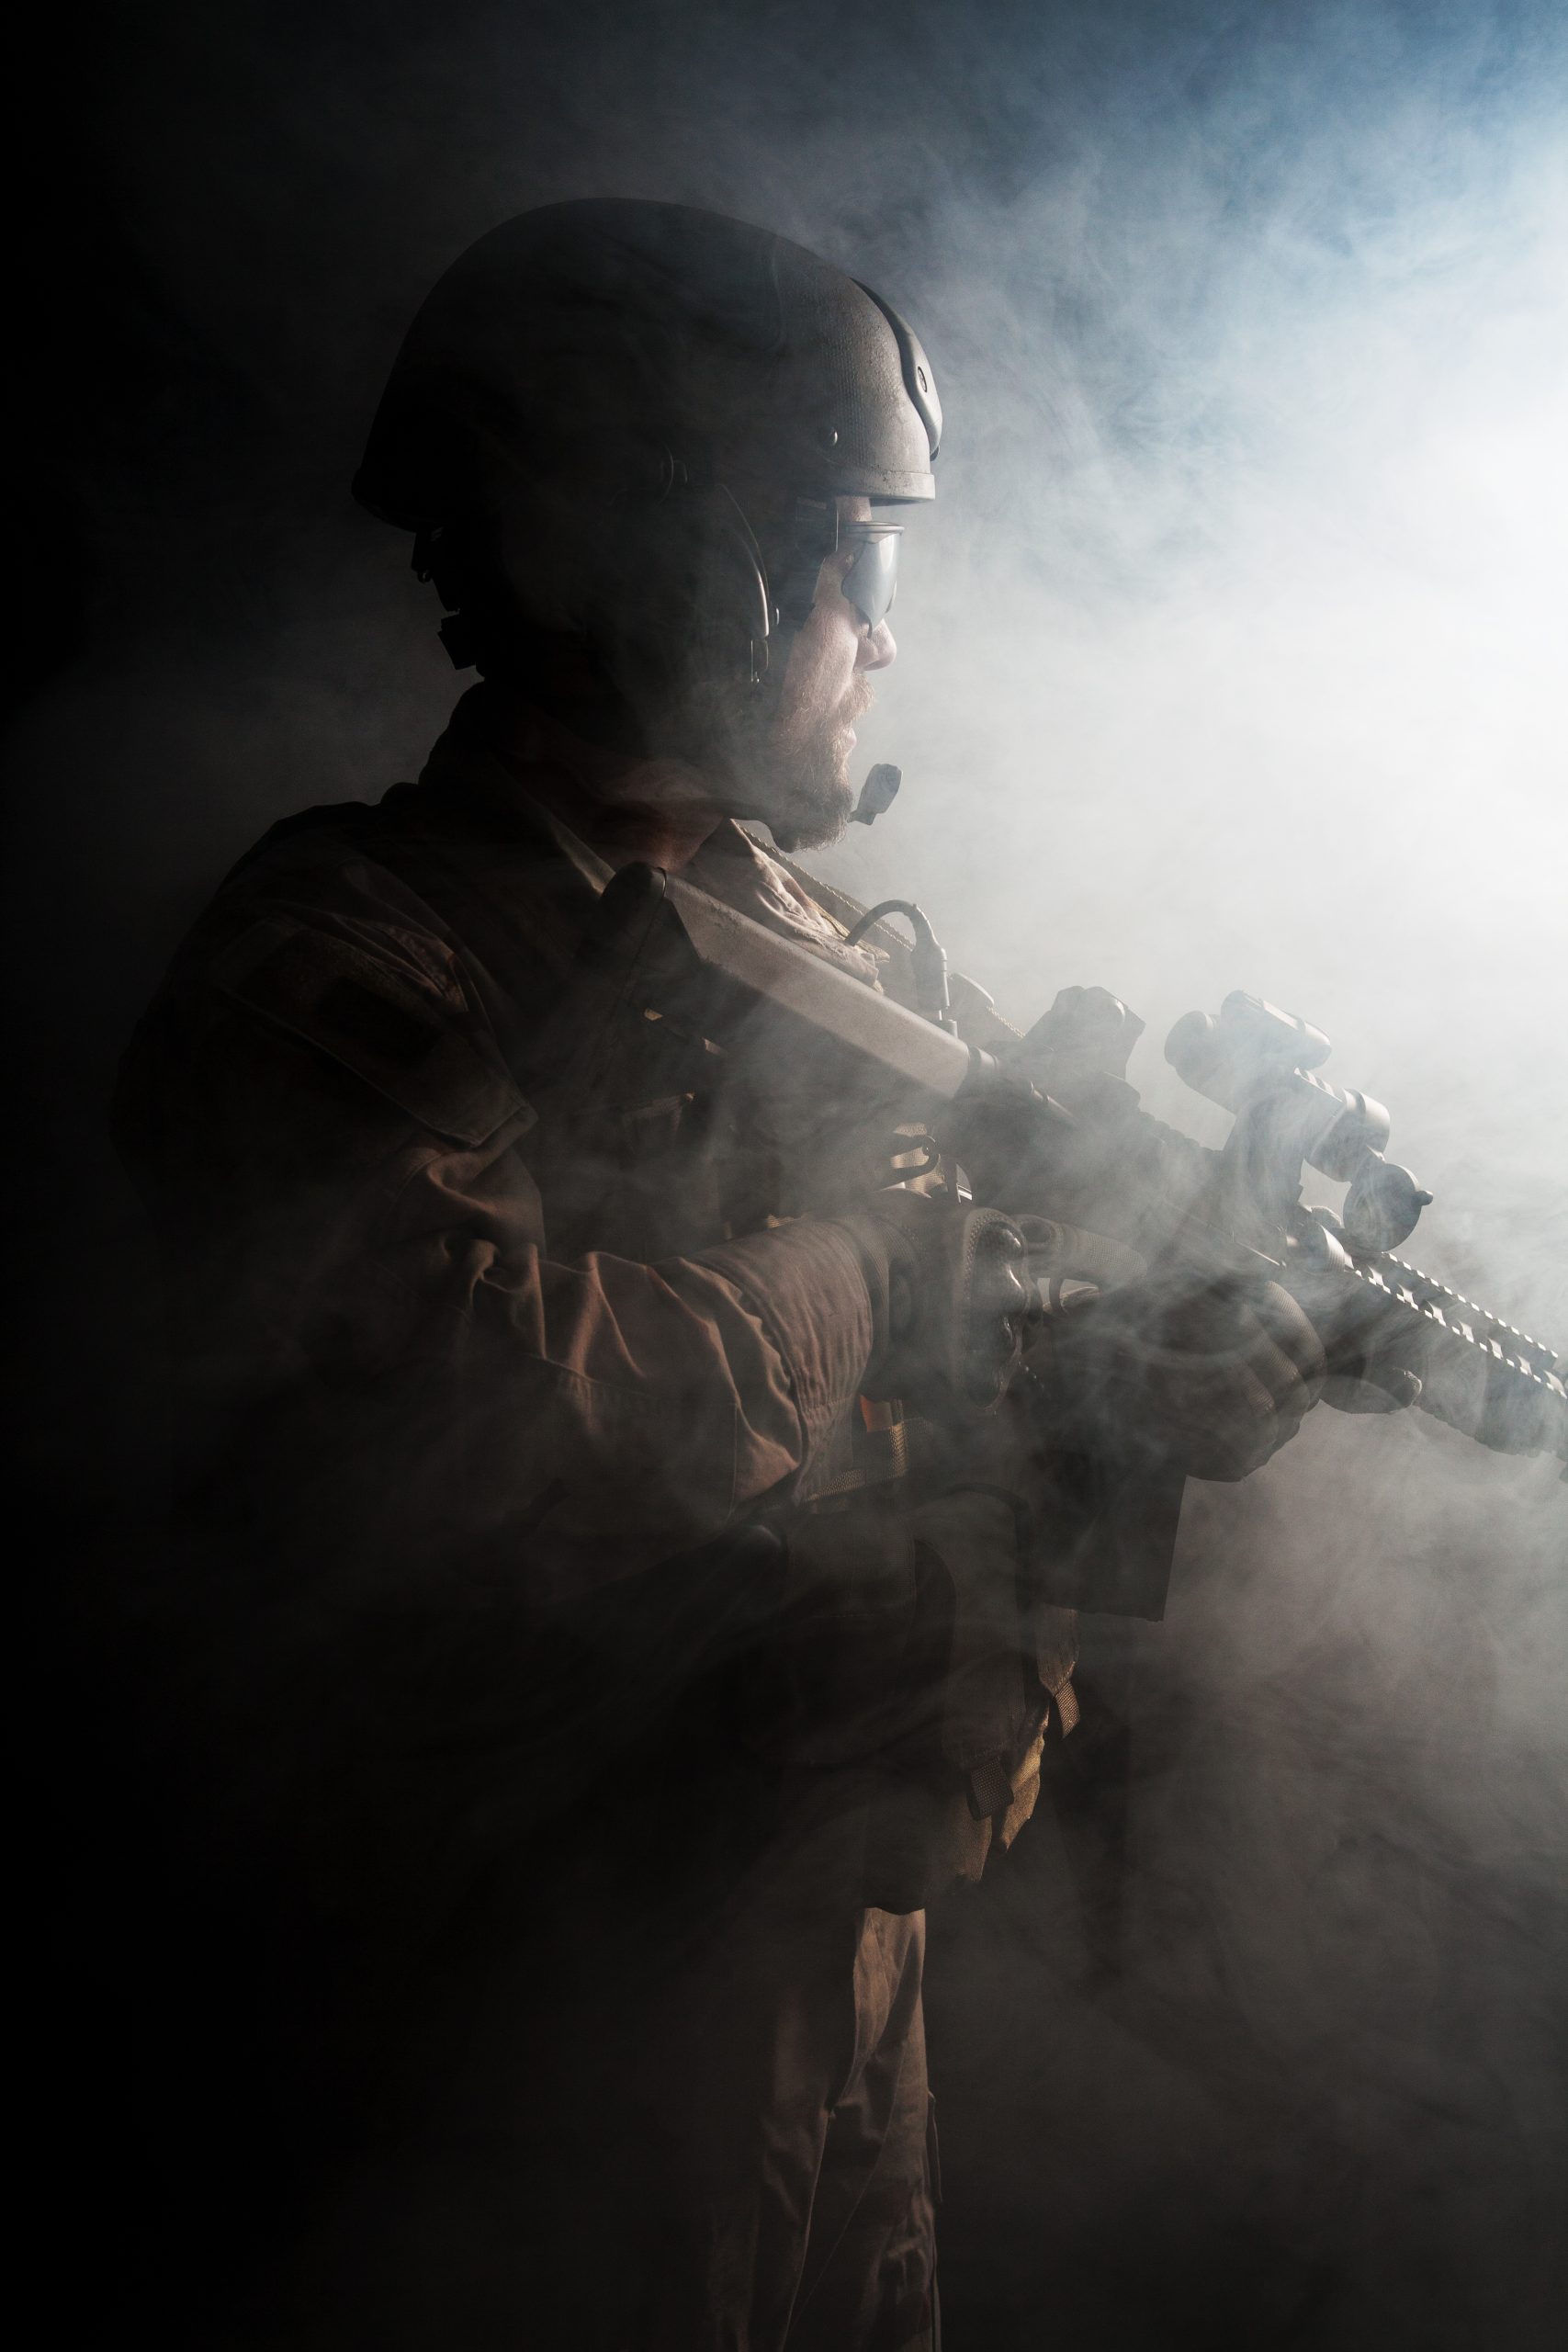 Bearded special forces soldier on dark background